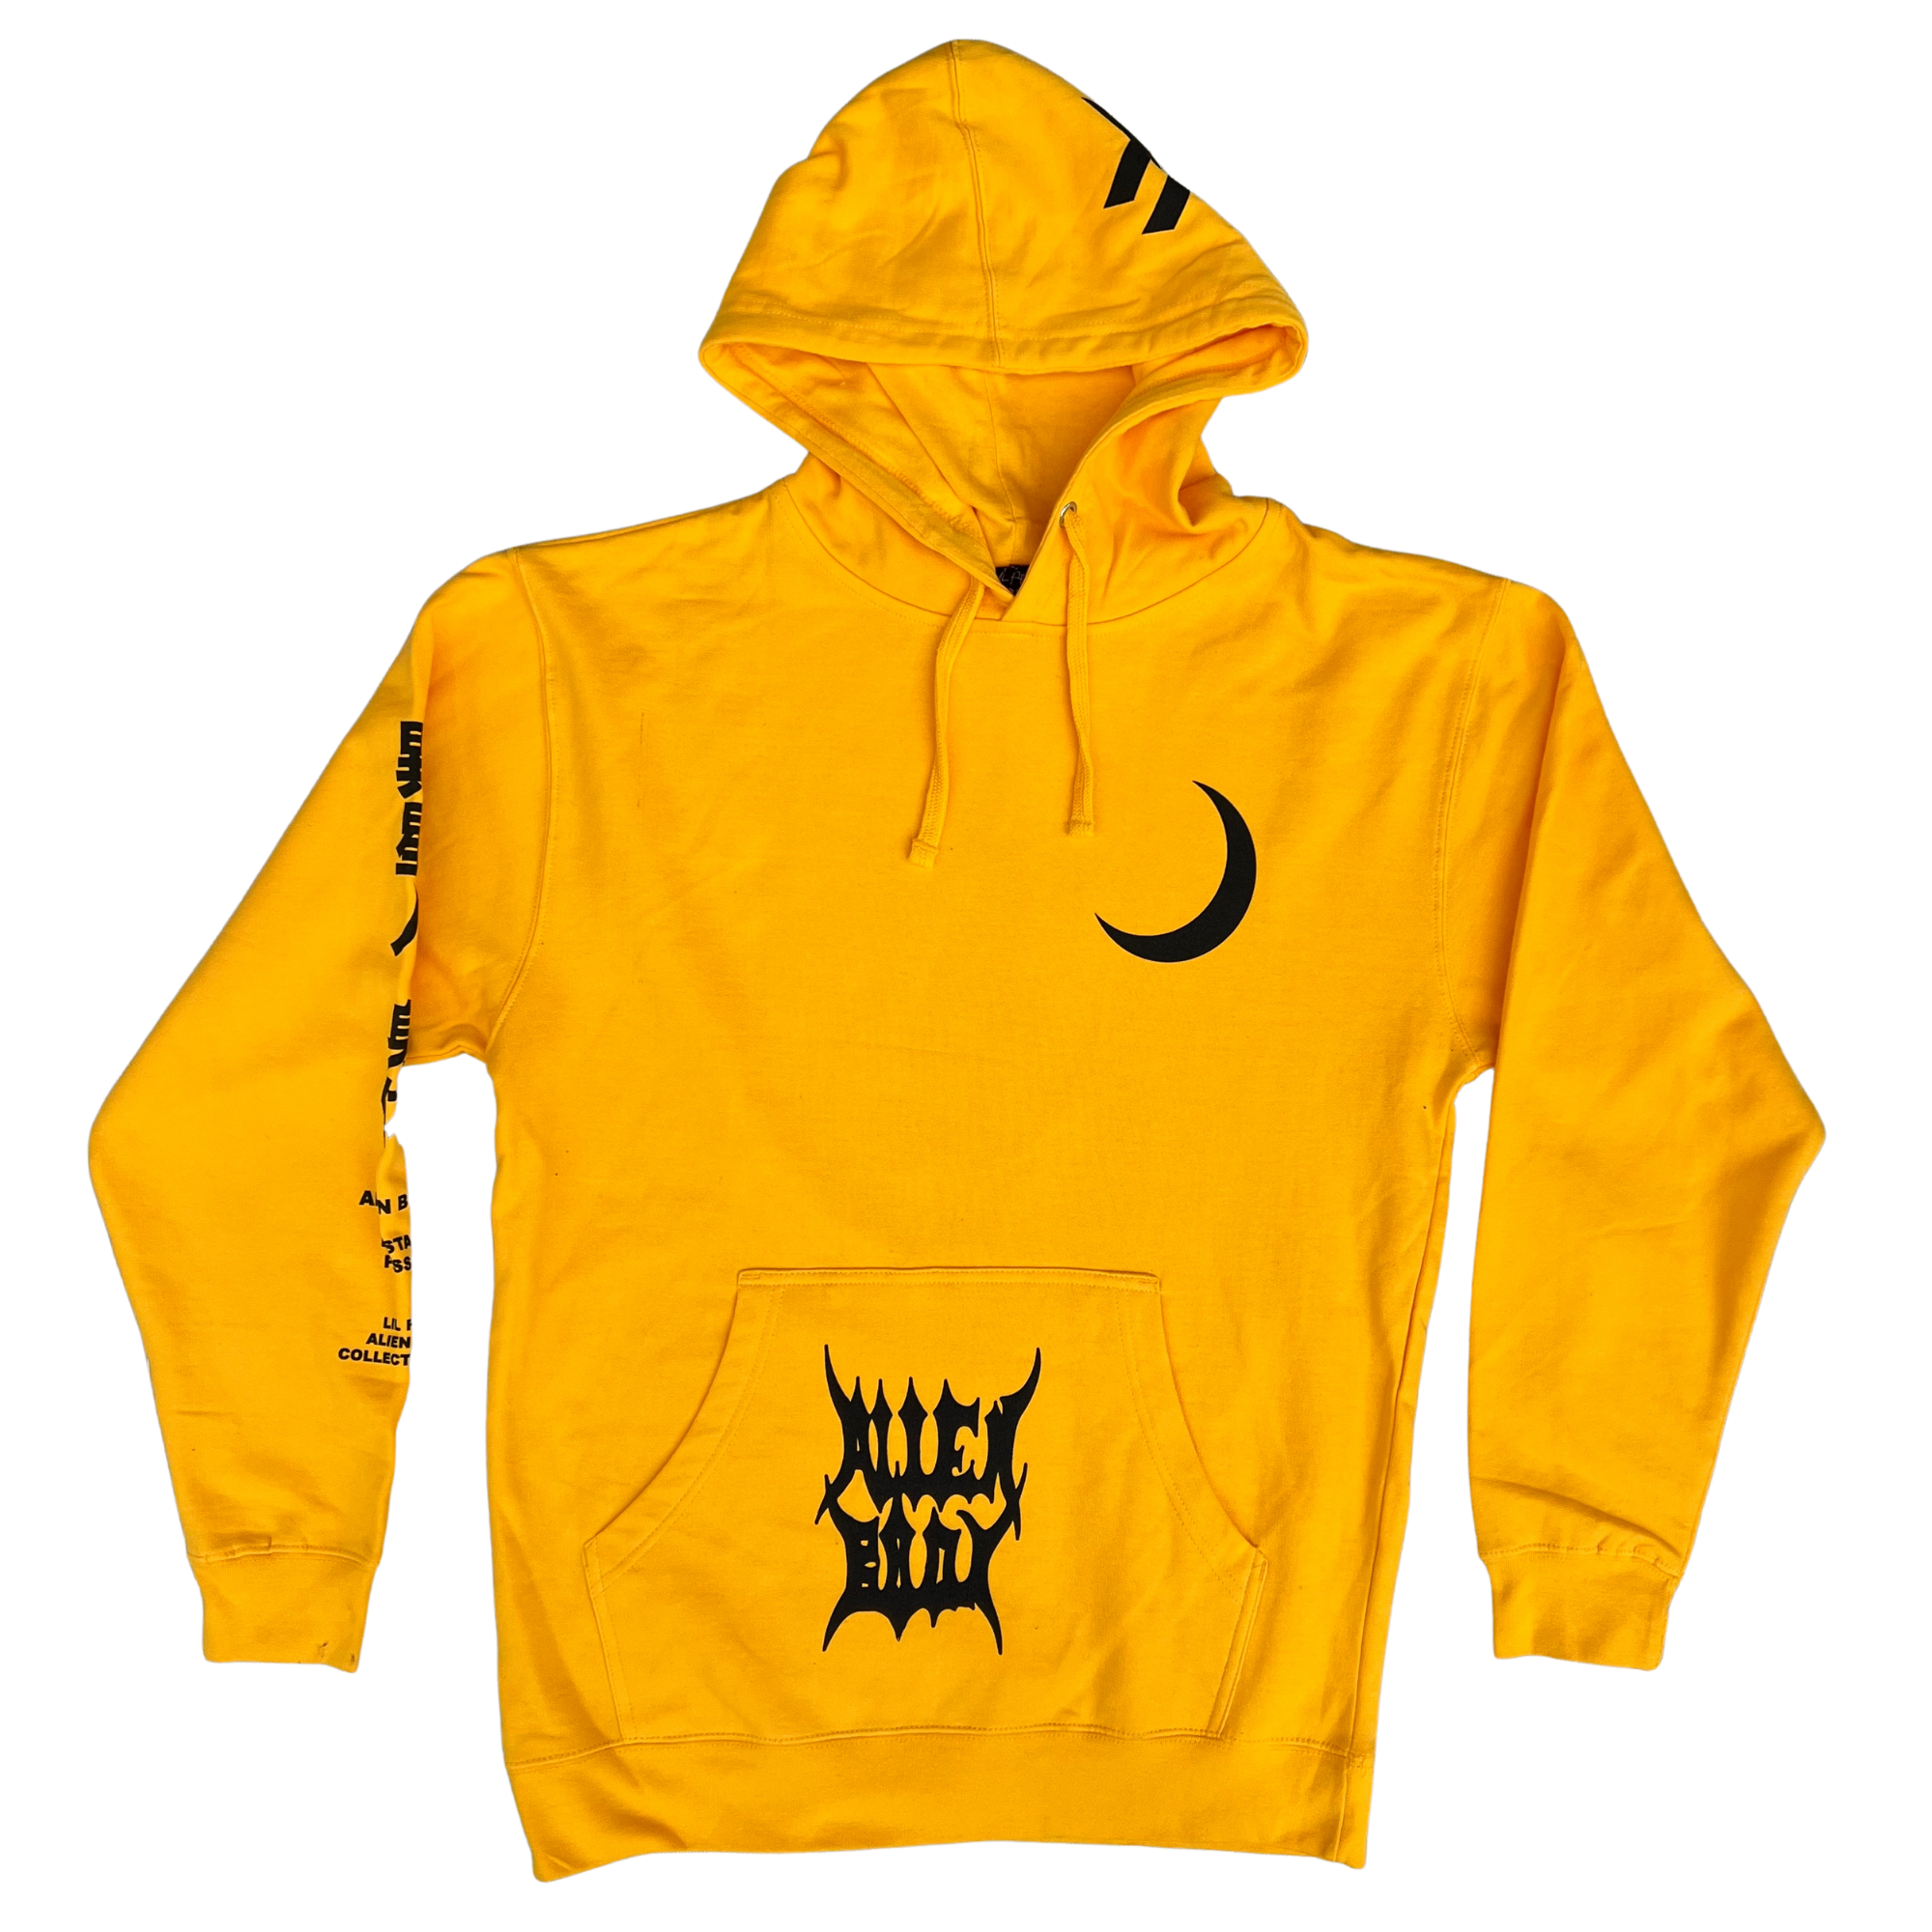 Alien Body x Lil Peep - Yellow RAW VISION Hoodie – Official Website of the  Estate of Gustav Ahr / Lil Peep